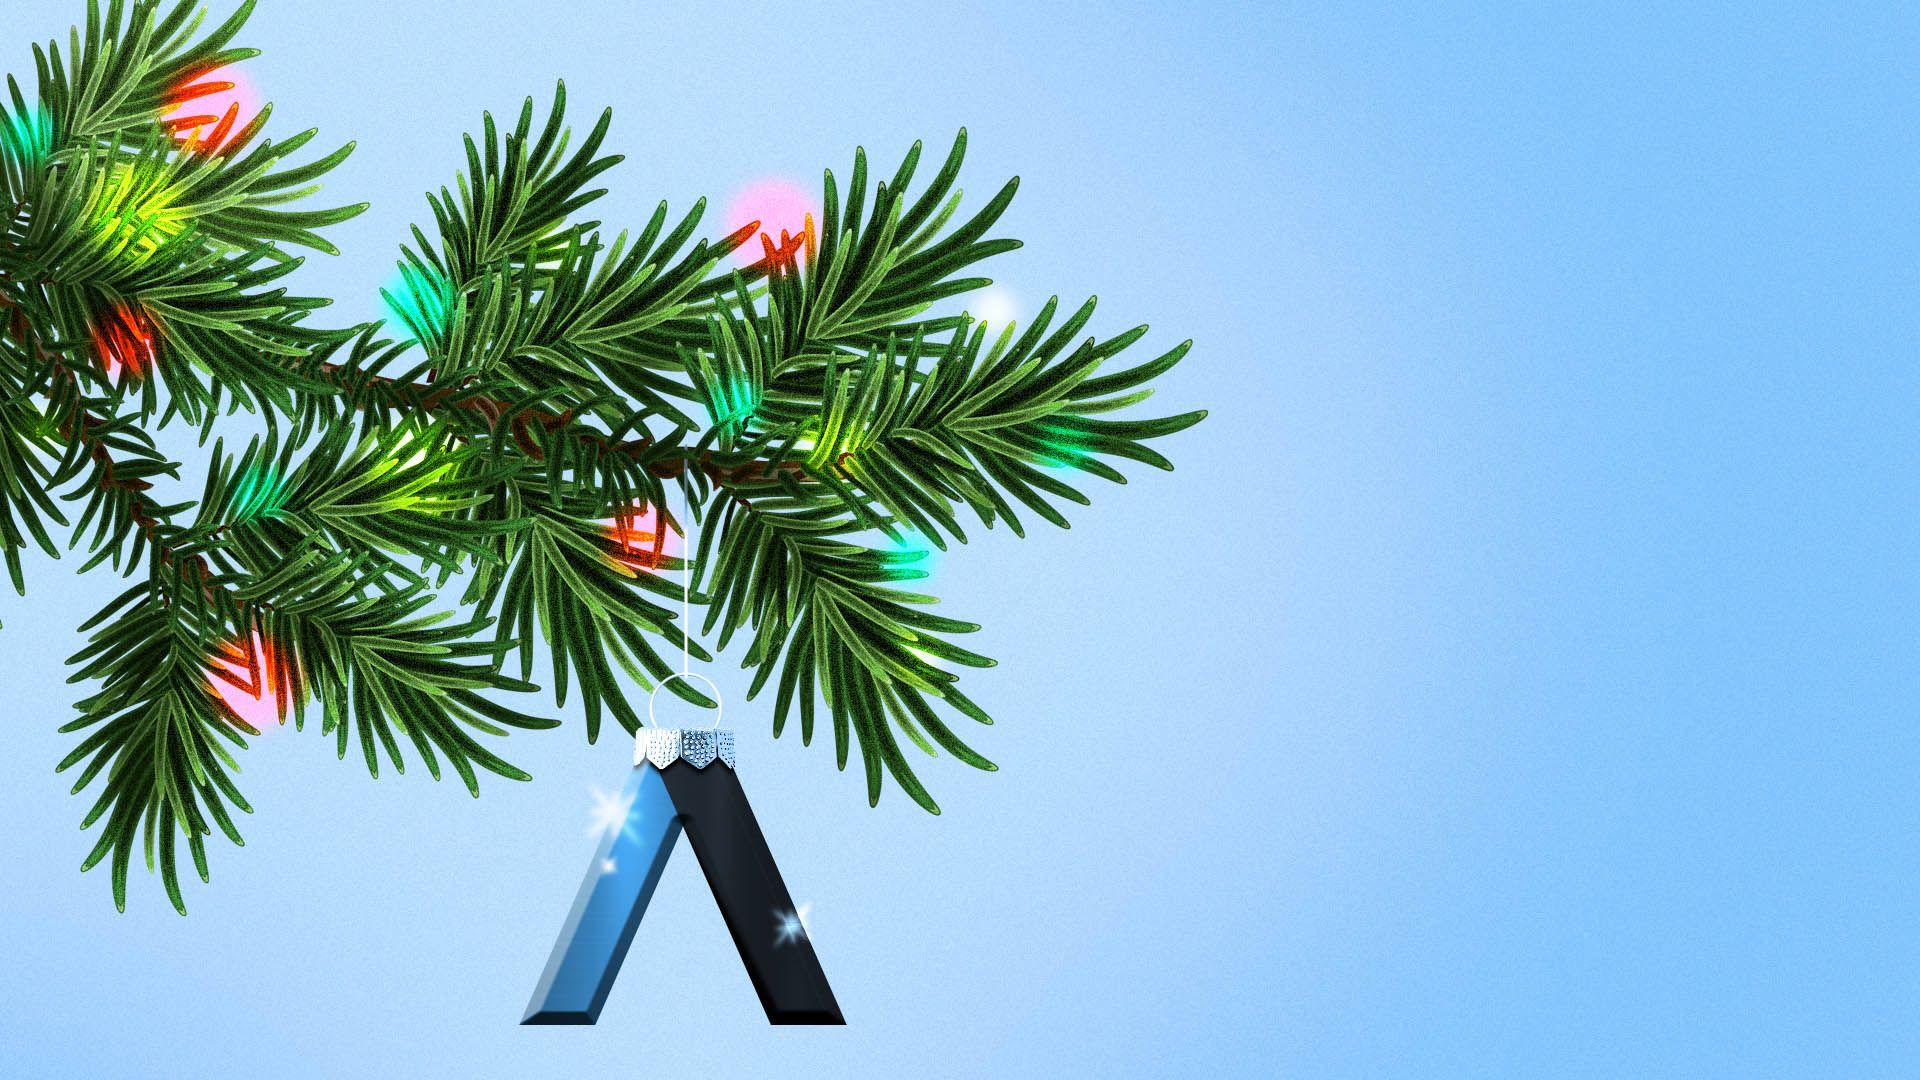 Illustration of the Axios logo as an ornament on a Christmas tree